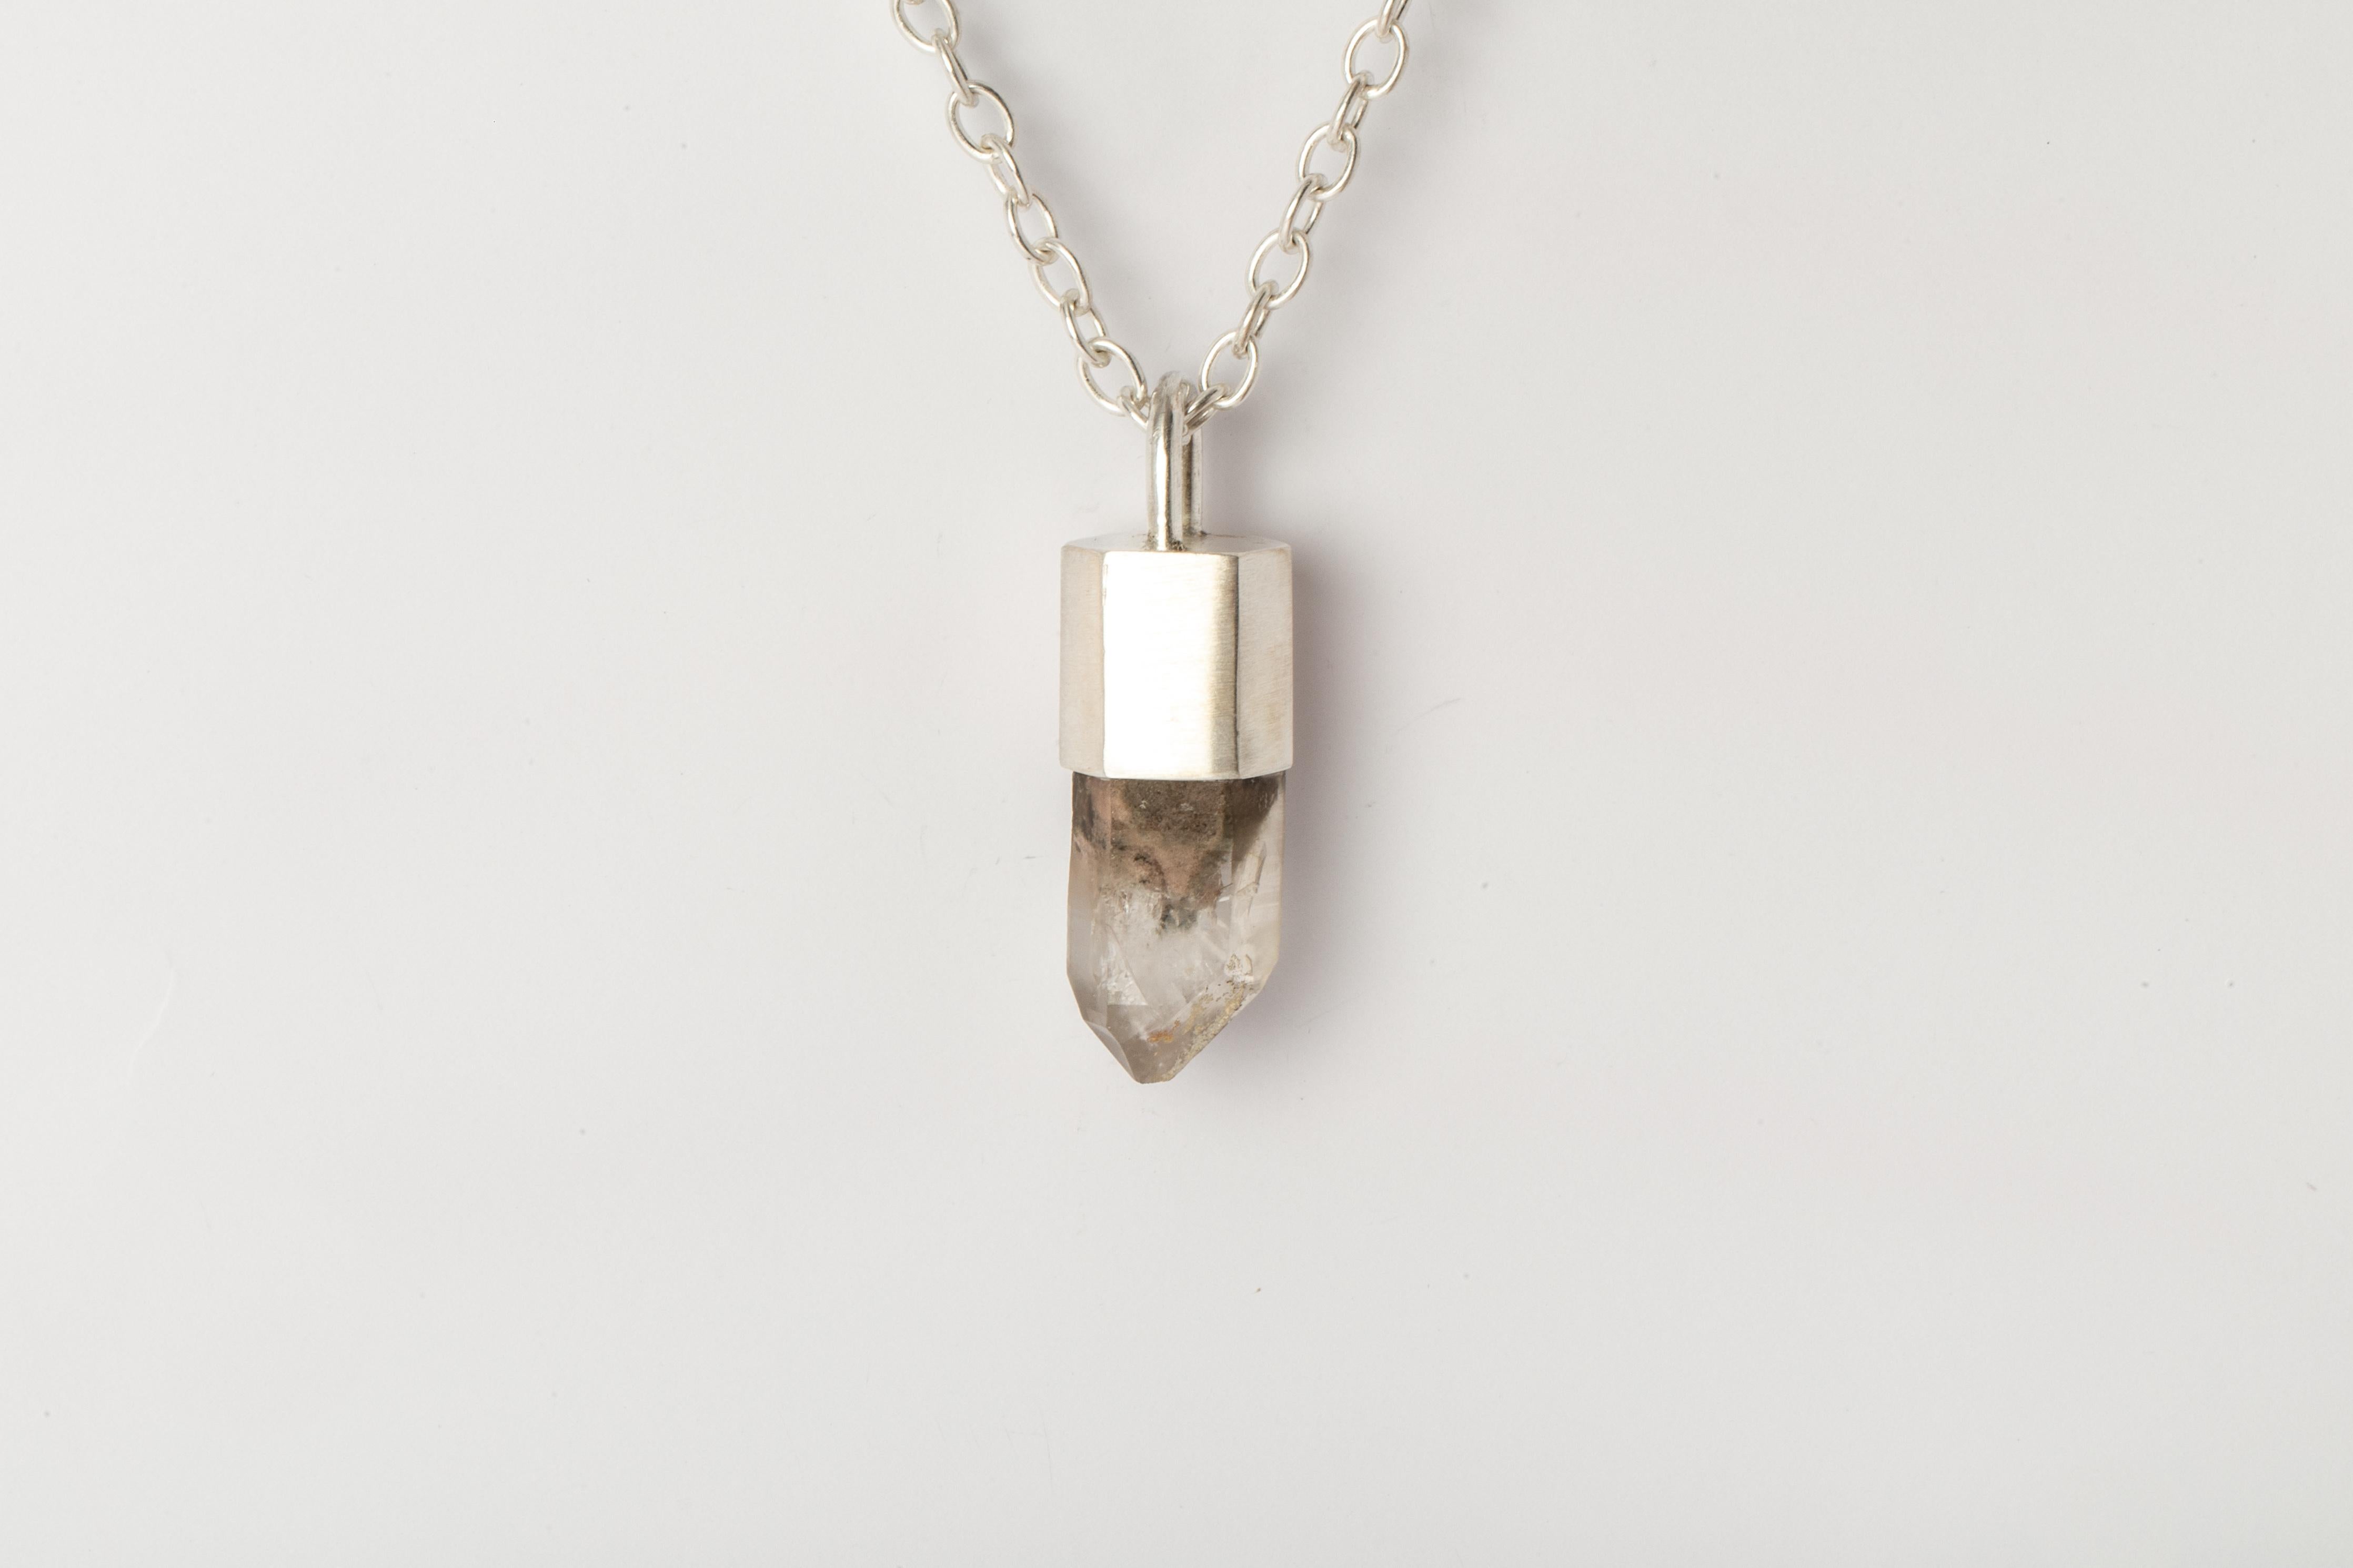 Pendant necklace in matte sterling silver and a garden quartz. It comes on 74 cm sterling silver chain.
The Talisman series is an exploration into the power of natural crystals. The crystals used in these pieces are discovered through adventure and